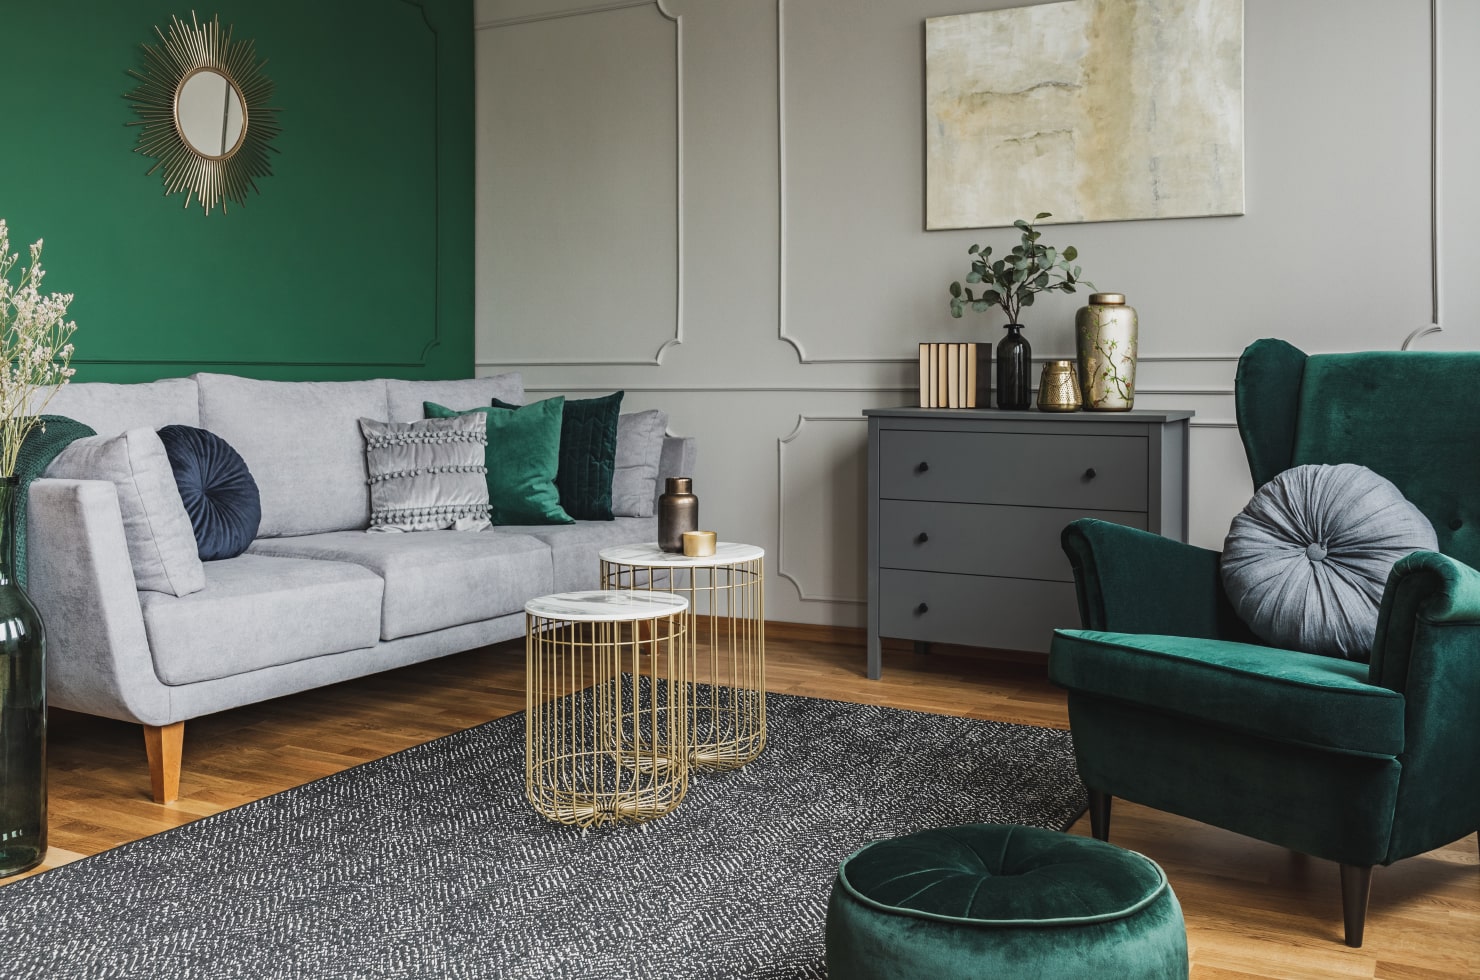 living-room-in-green-and-gray-tones@2x